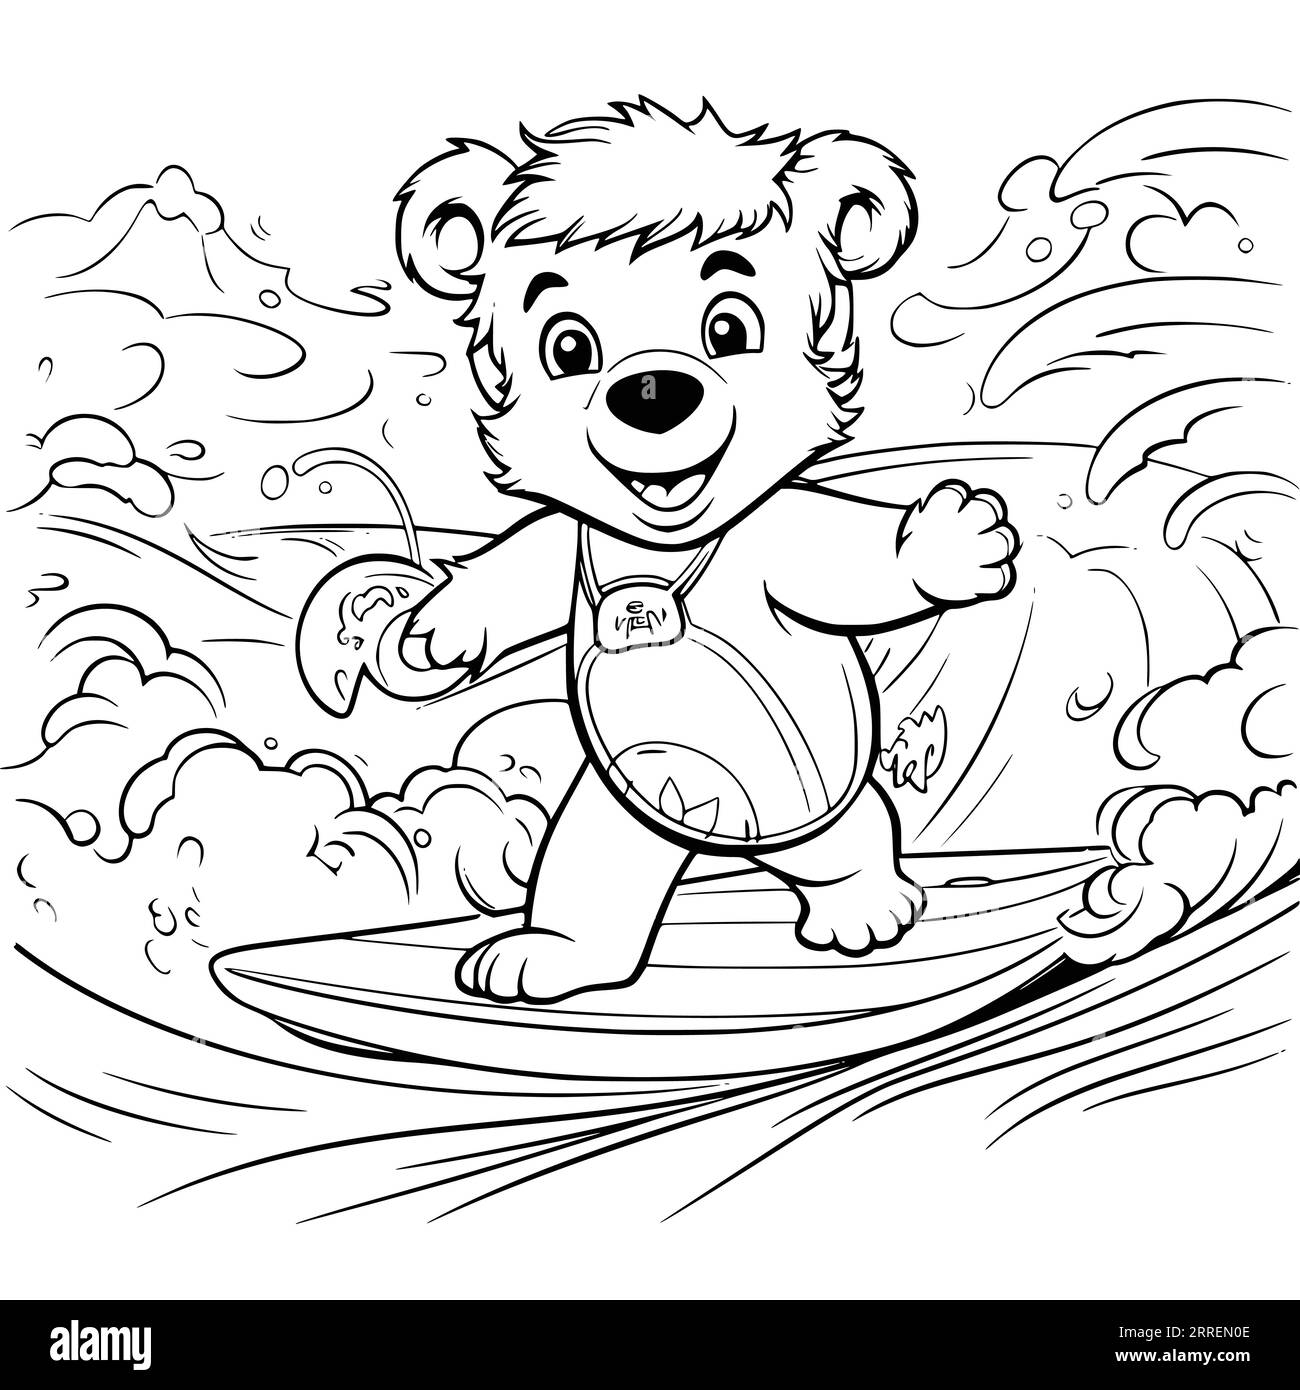 Bear Surfing Coloring Page Drawing For Kids Stock Vector